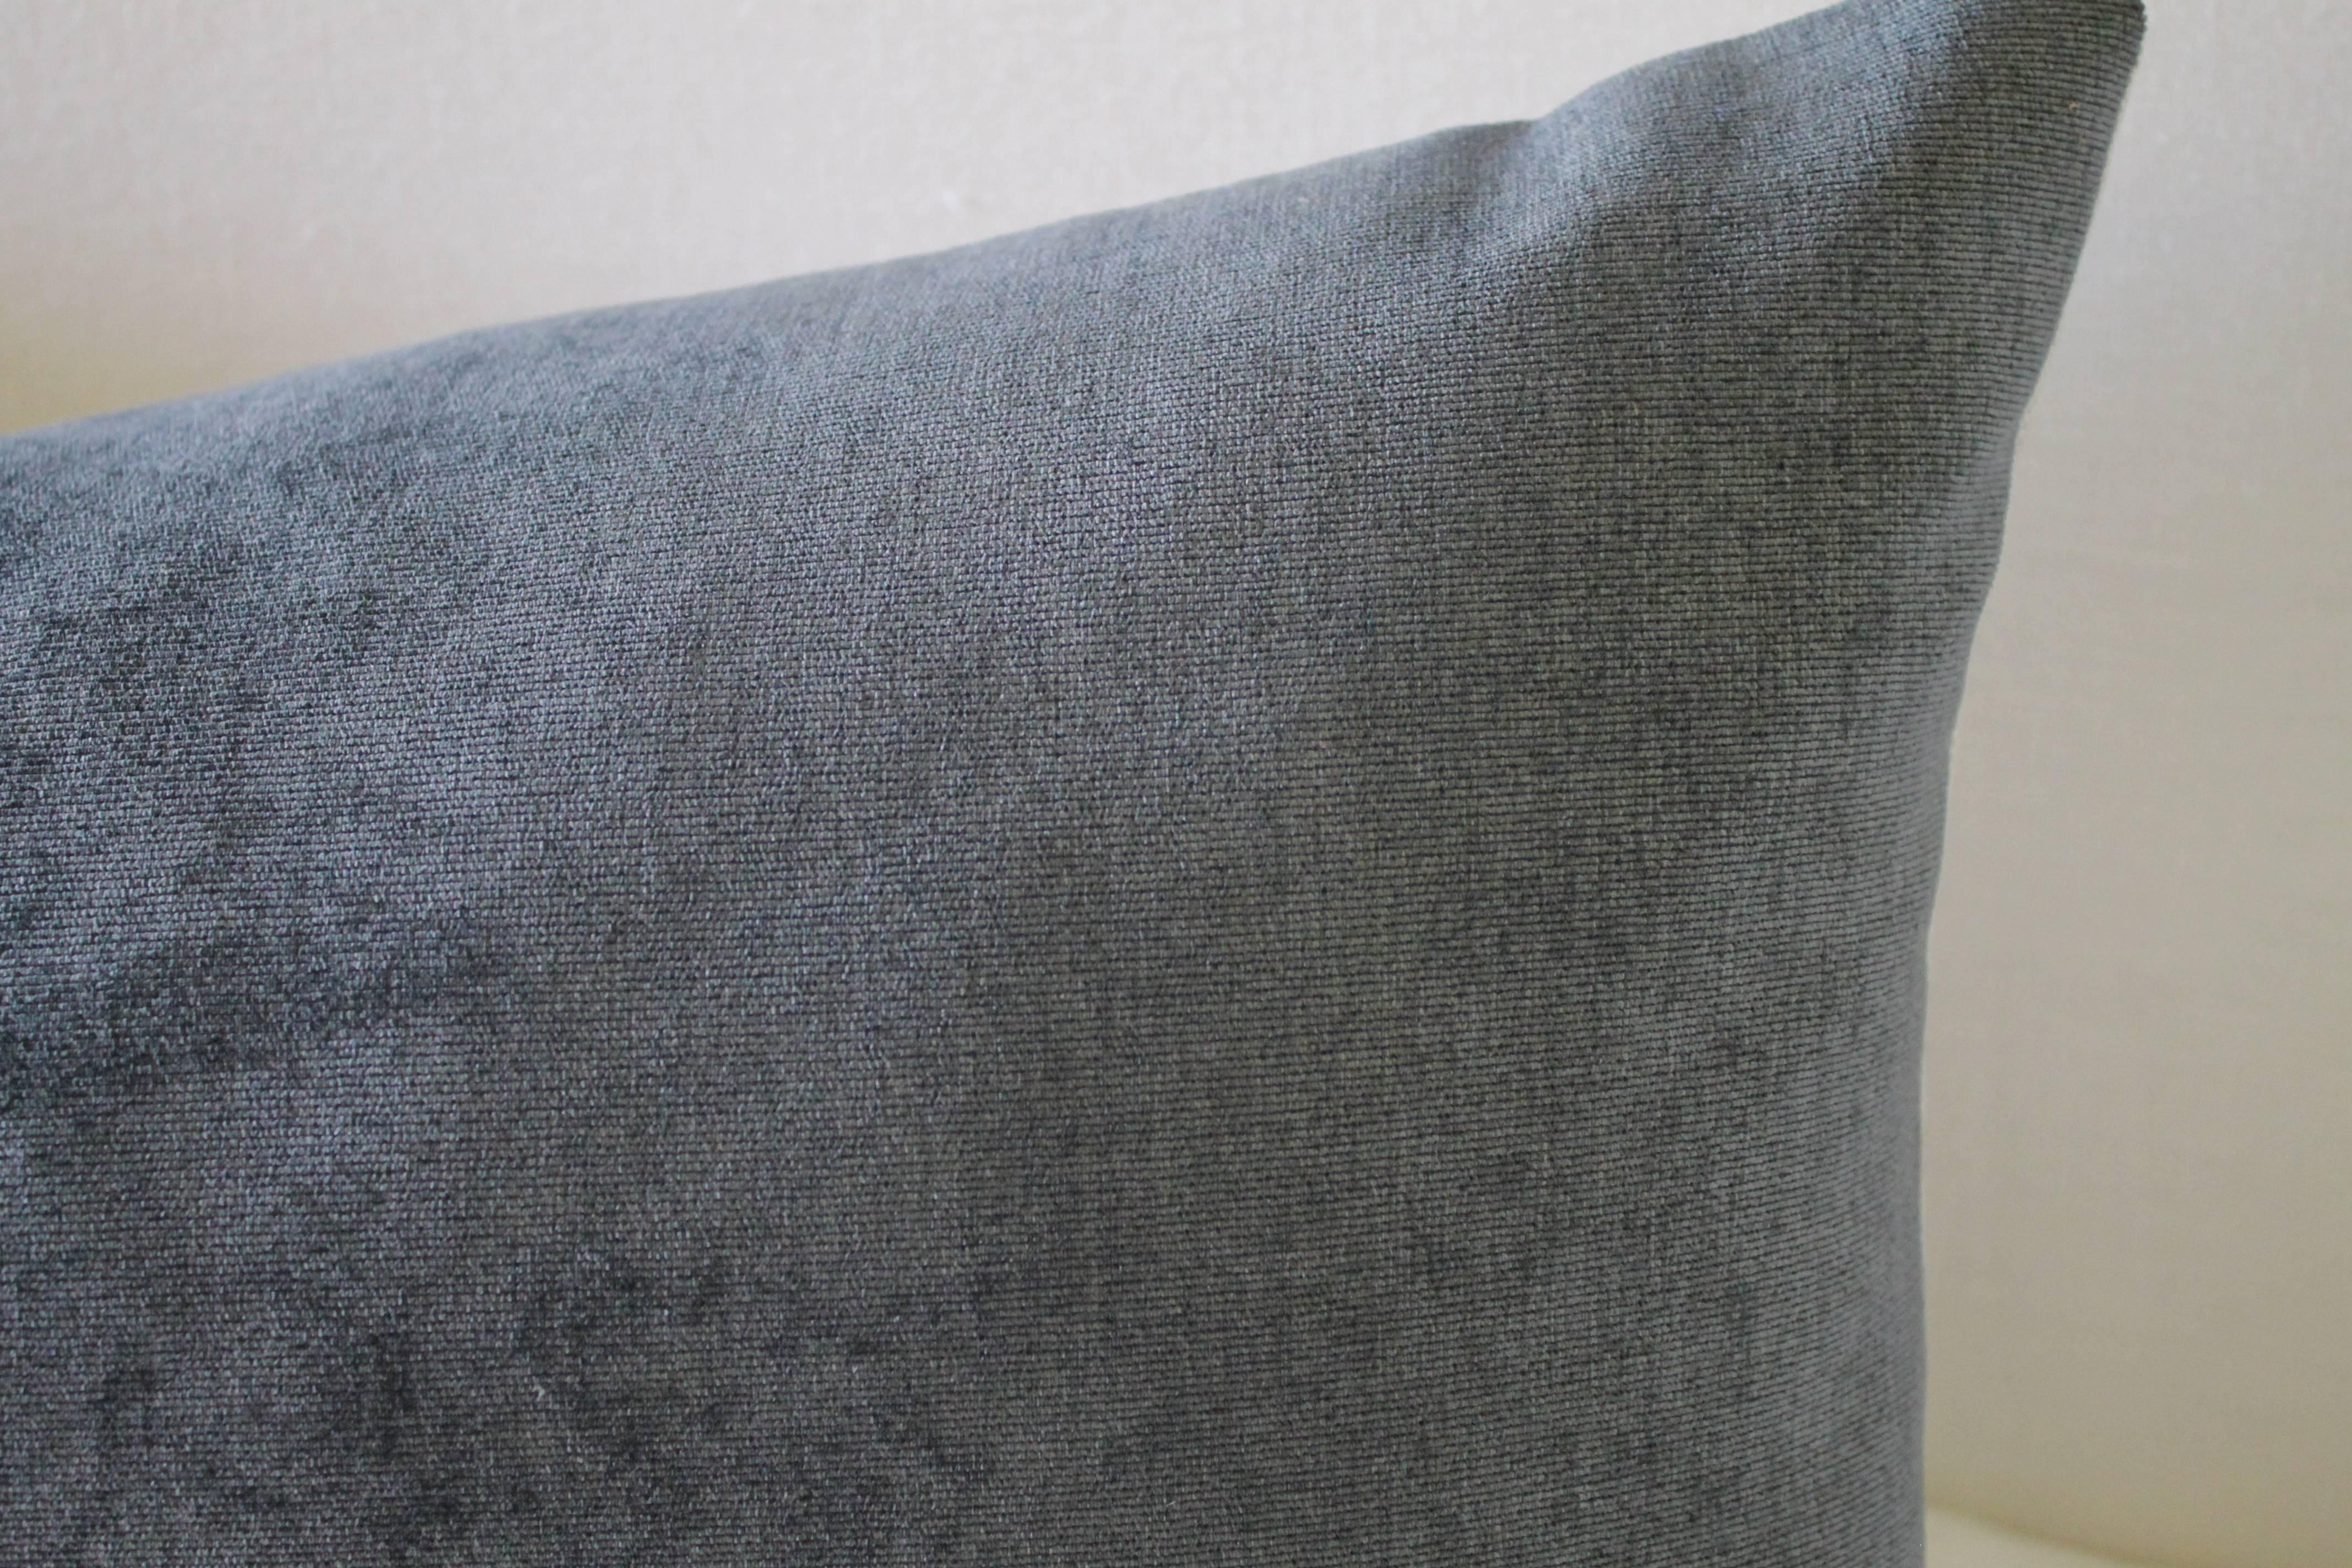 Our velvet and linen accent pillow is custom made in our Full Bloom Cottage studios, a beautiful deep grey with blue tones has a vintage velvet look, the back is 100% pure natural Belgian linen. Zipper closure, overlocked seams, each pillow is